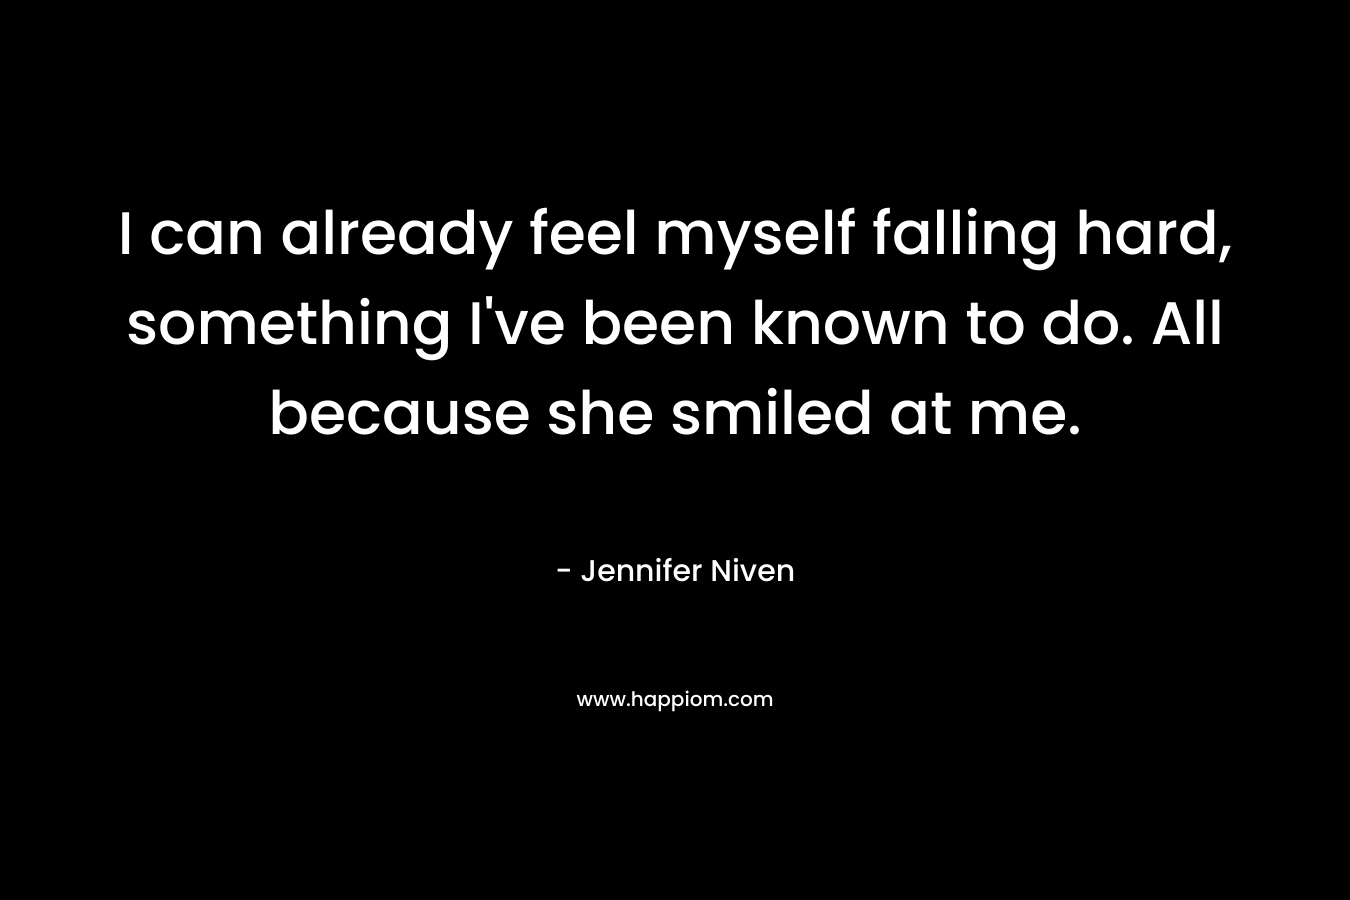 I can already feel myself falling hard, something I’ve been known to do. All because she smiled at me. – Jennifer Niven